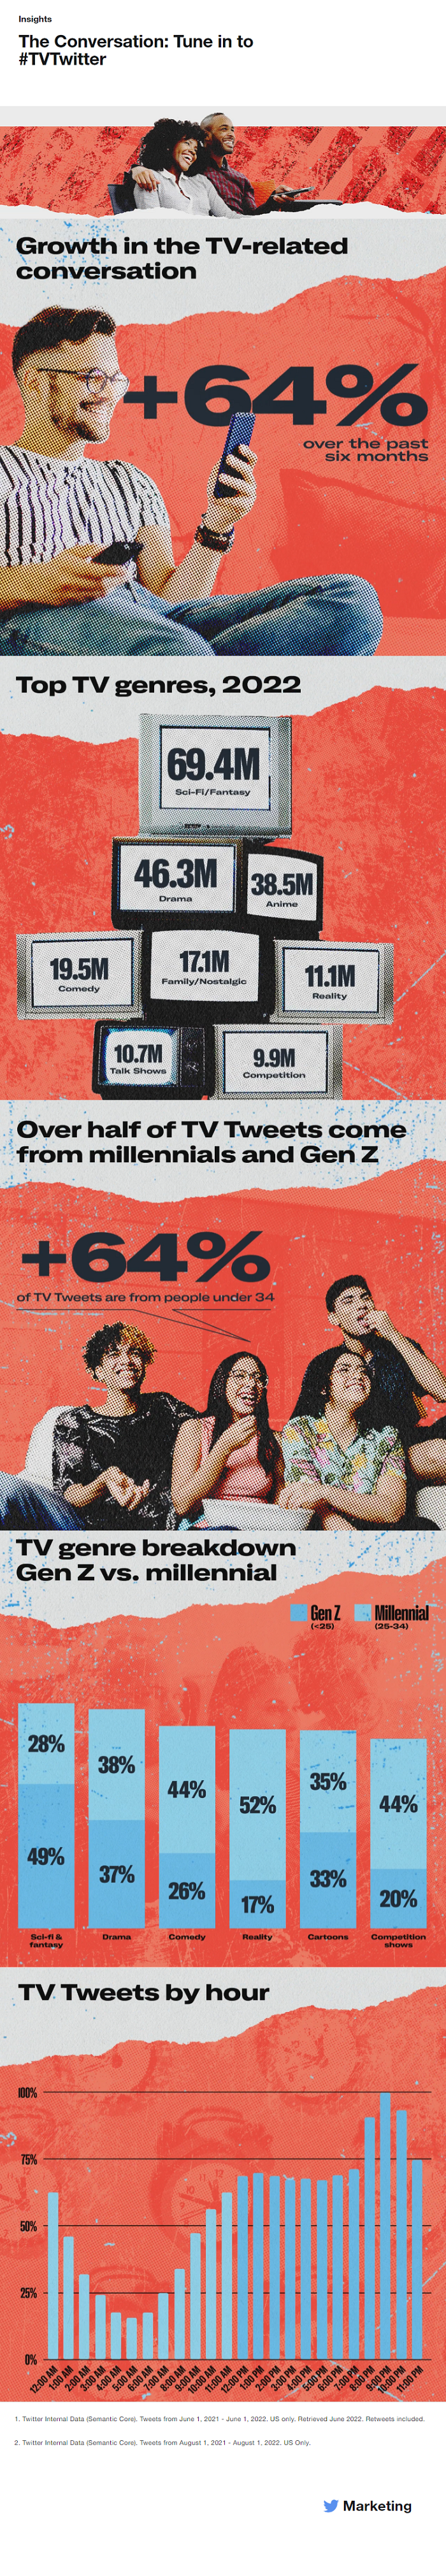 New Insights by Twitter on TV Show Discussion through Tweet